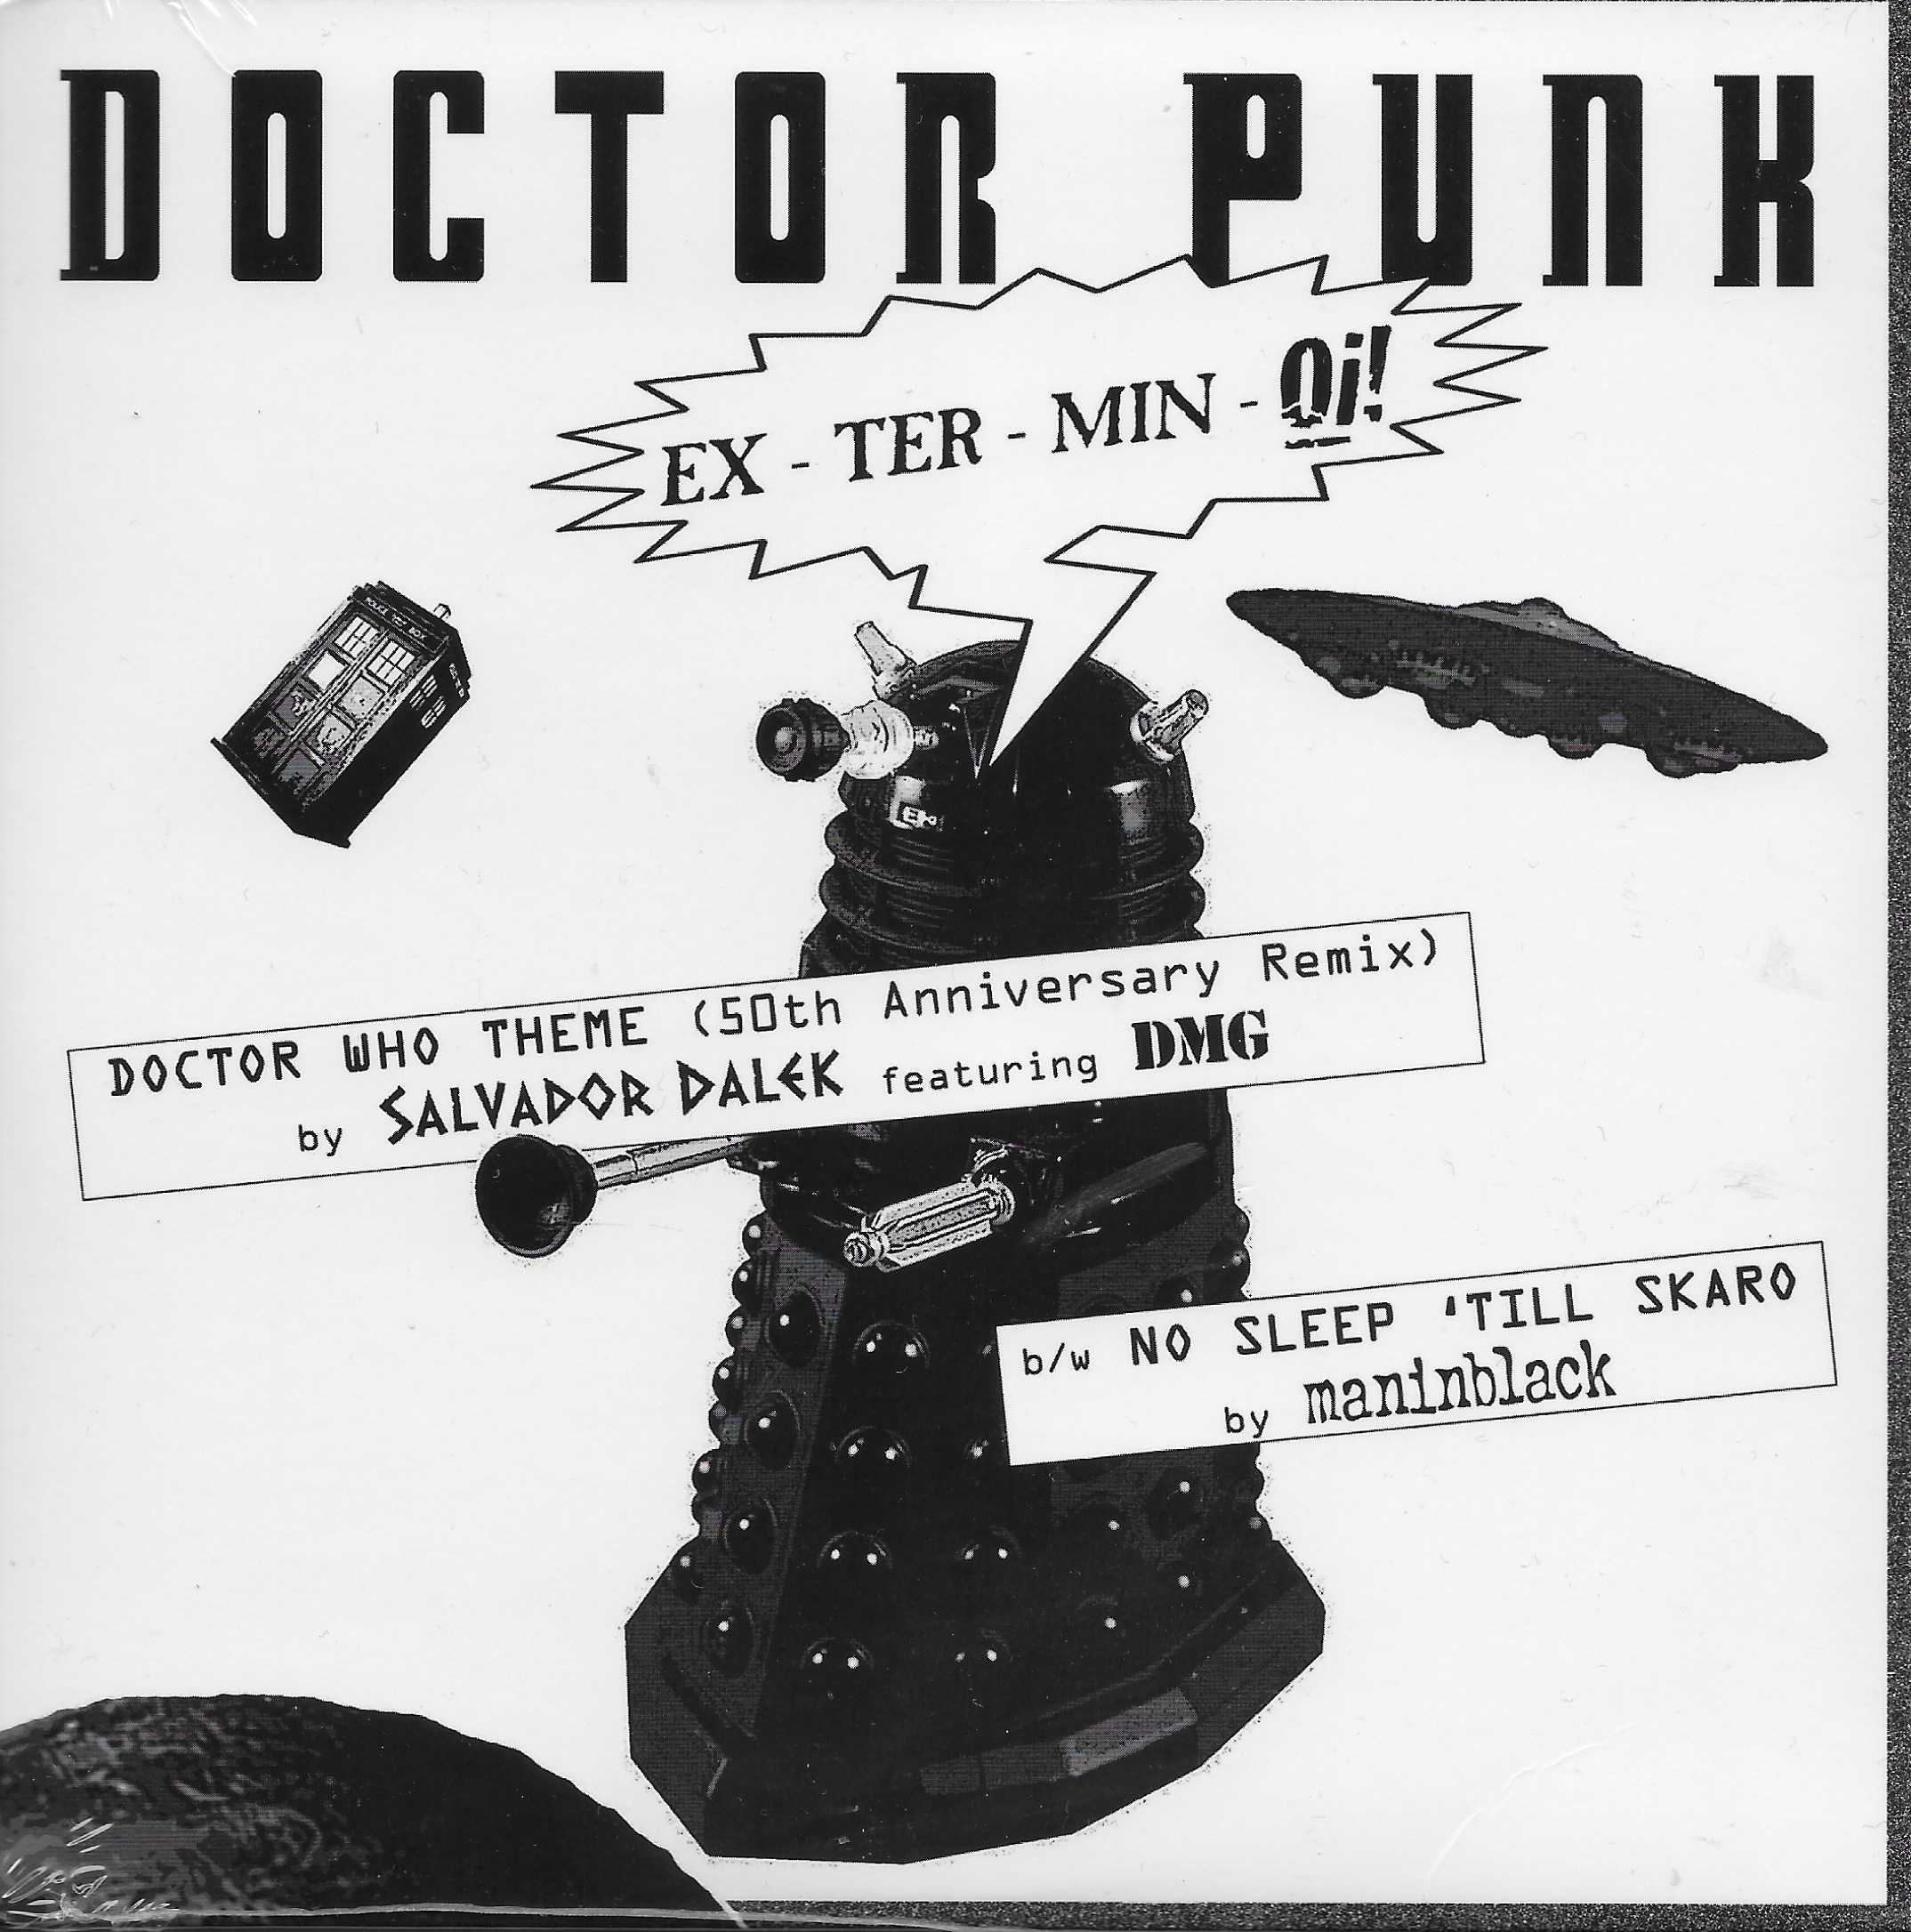 Picture of RAN 165 Doctor Who theme (50th Anniversary Remix) by artist Ron Grainer / DMG from the BBC records and Tapes library